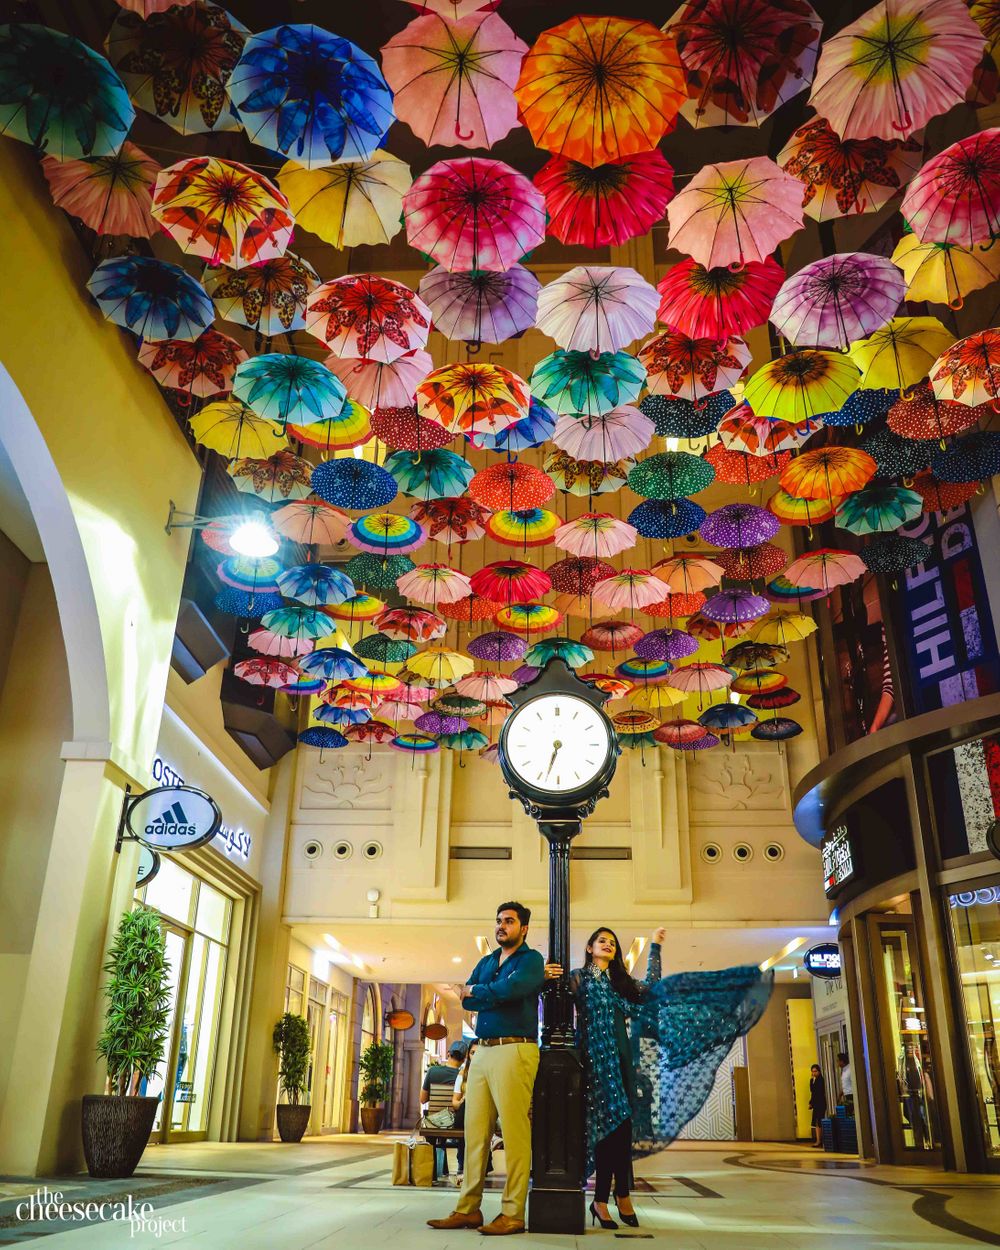 Photo of Pre wedding shot with umbrellas in ceiling